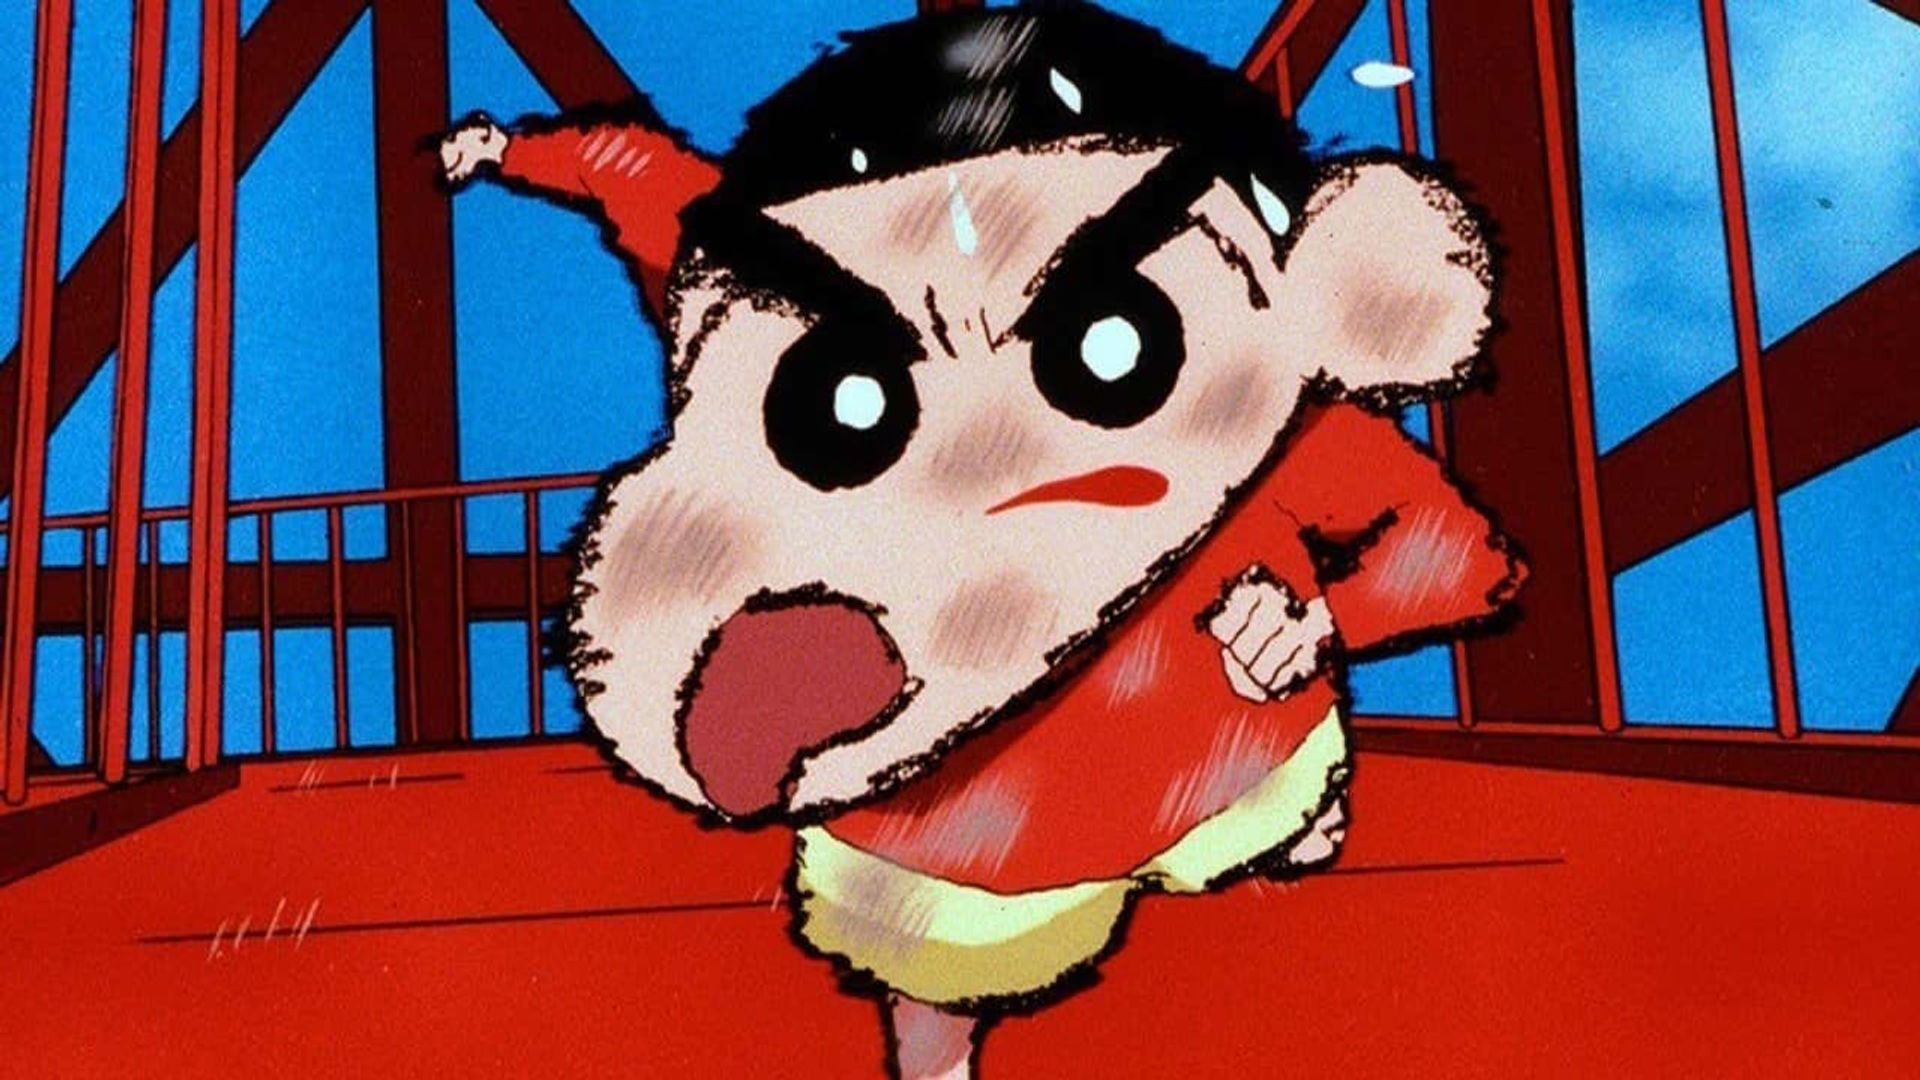 Shin Chan: The Adult Empire Strikes Back background